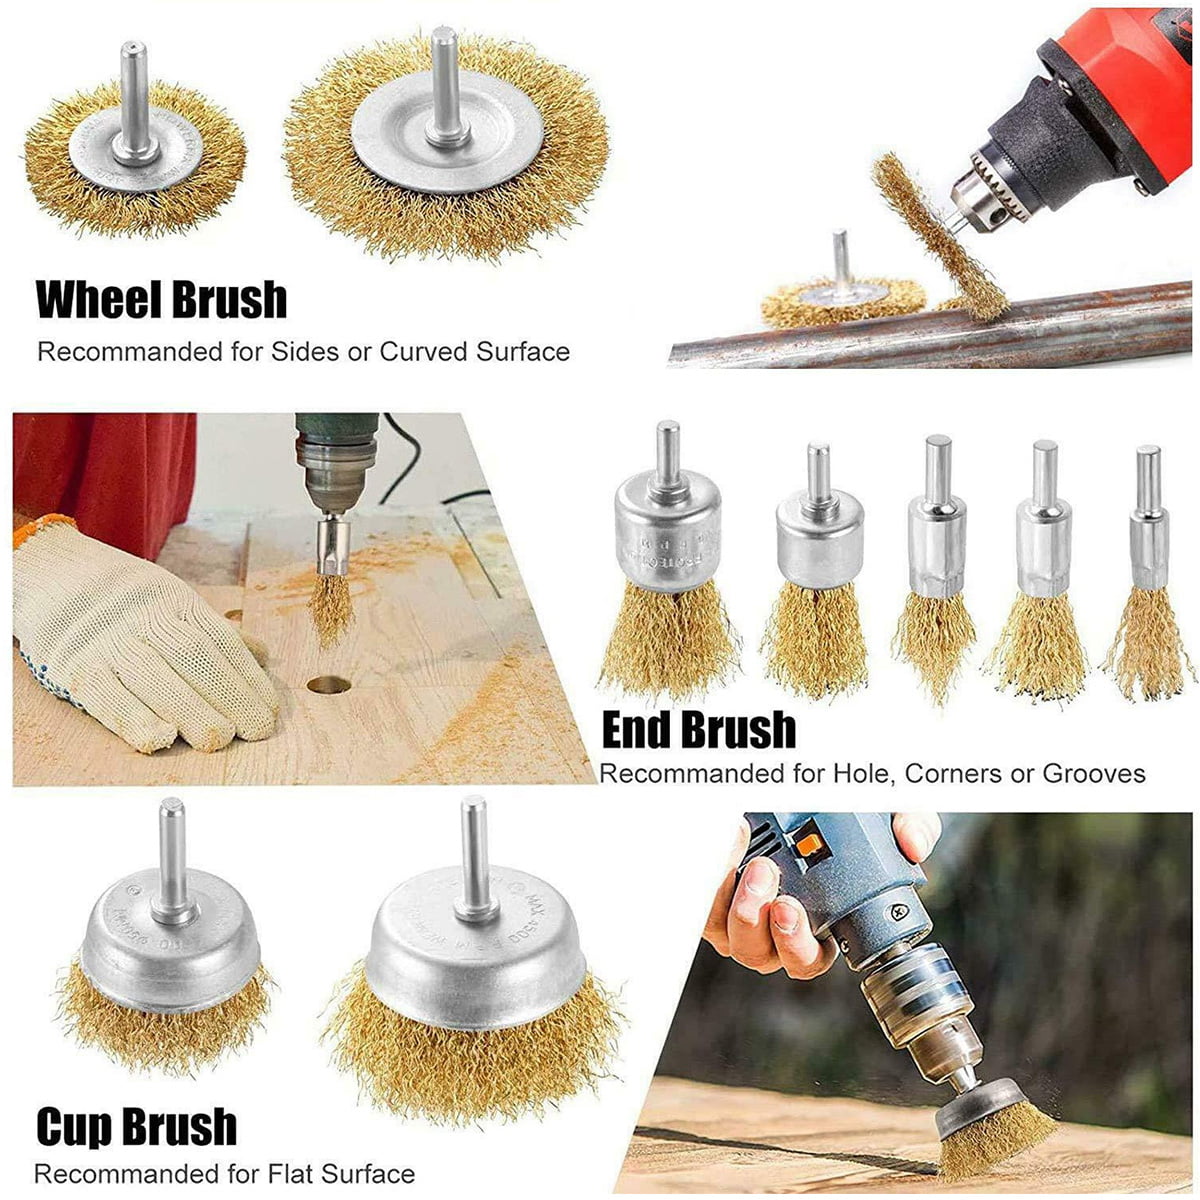 24pcs/set Wire Cup/Wheel Brush Rust Removal BBQ Clean Drill Attachments 